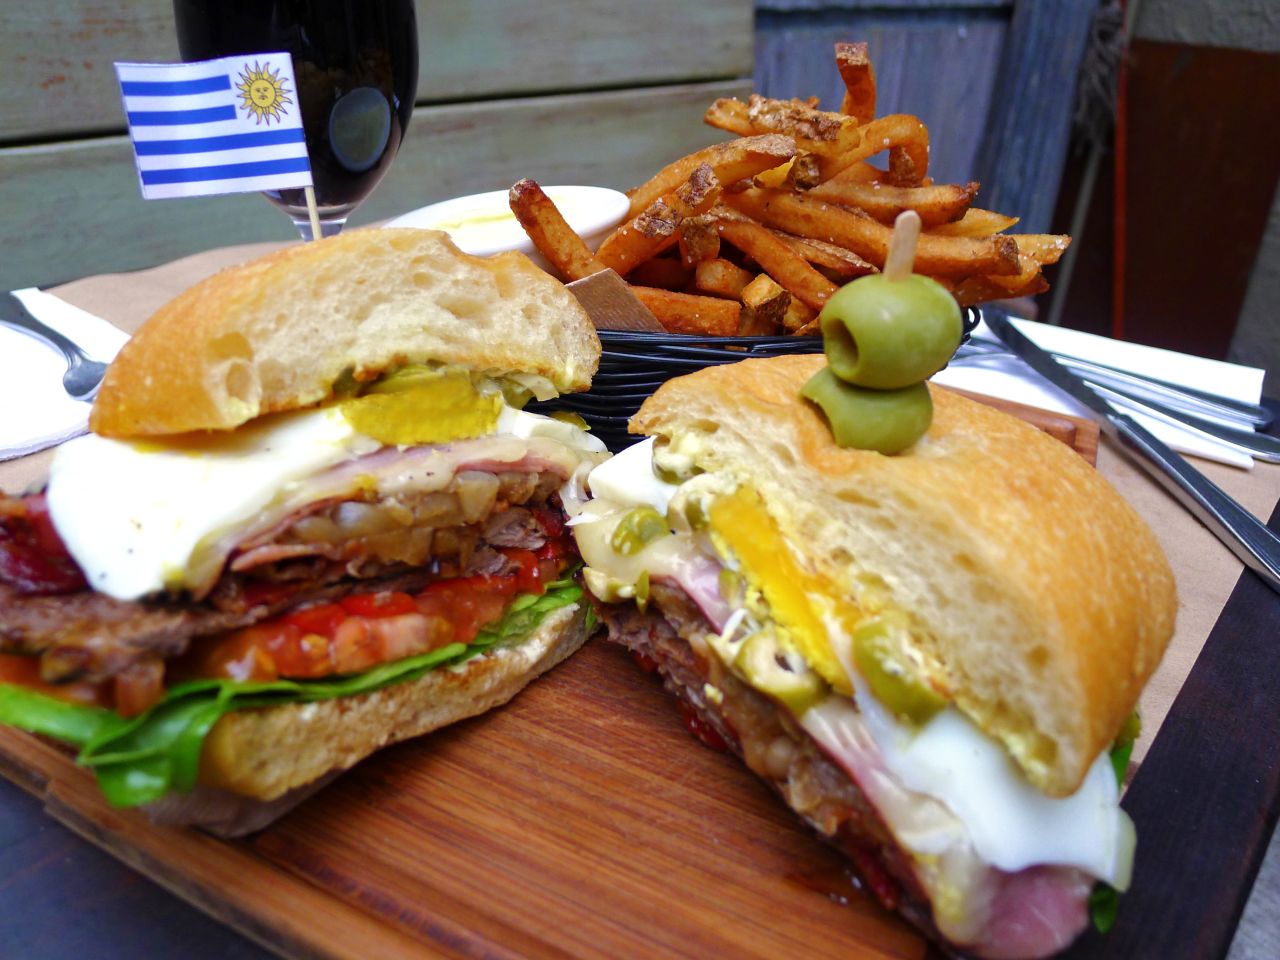 The Uruguayan chivito piles skirt steak or filet mignon with layers of ham and bacon, accompanied by onion, mayonnaise, lettuce, tomato, mozzarella, olives, hard-boiled egg and lettuce. Pictured: chivito from Tabaré in Brooklyn.